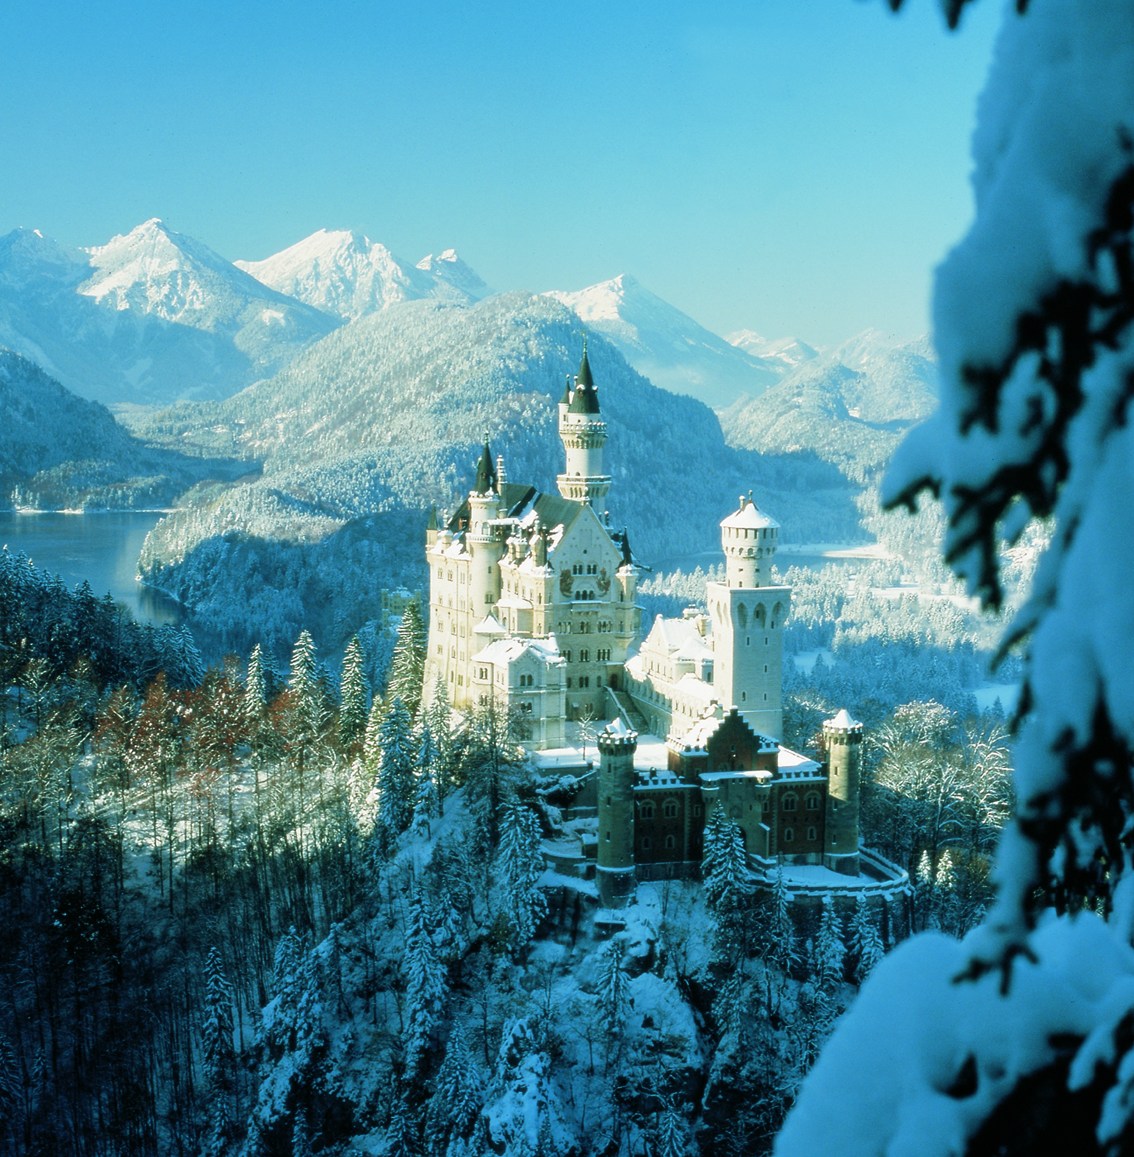 Bavarian gothic-revival castle, covered in frost